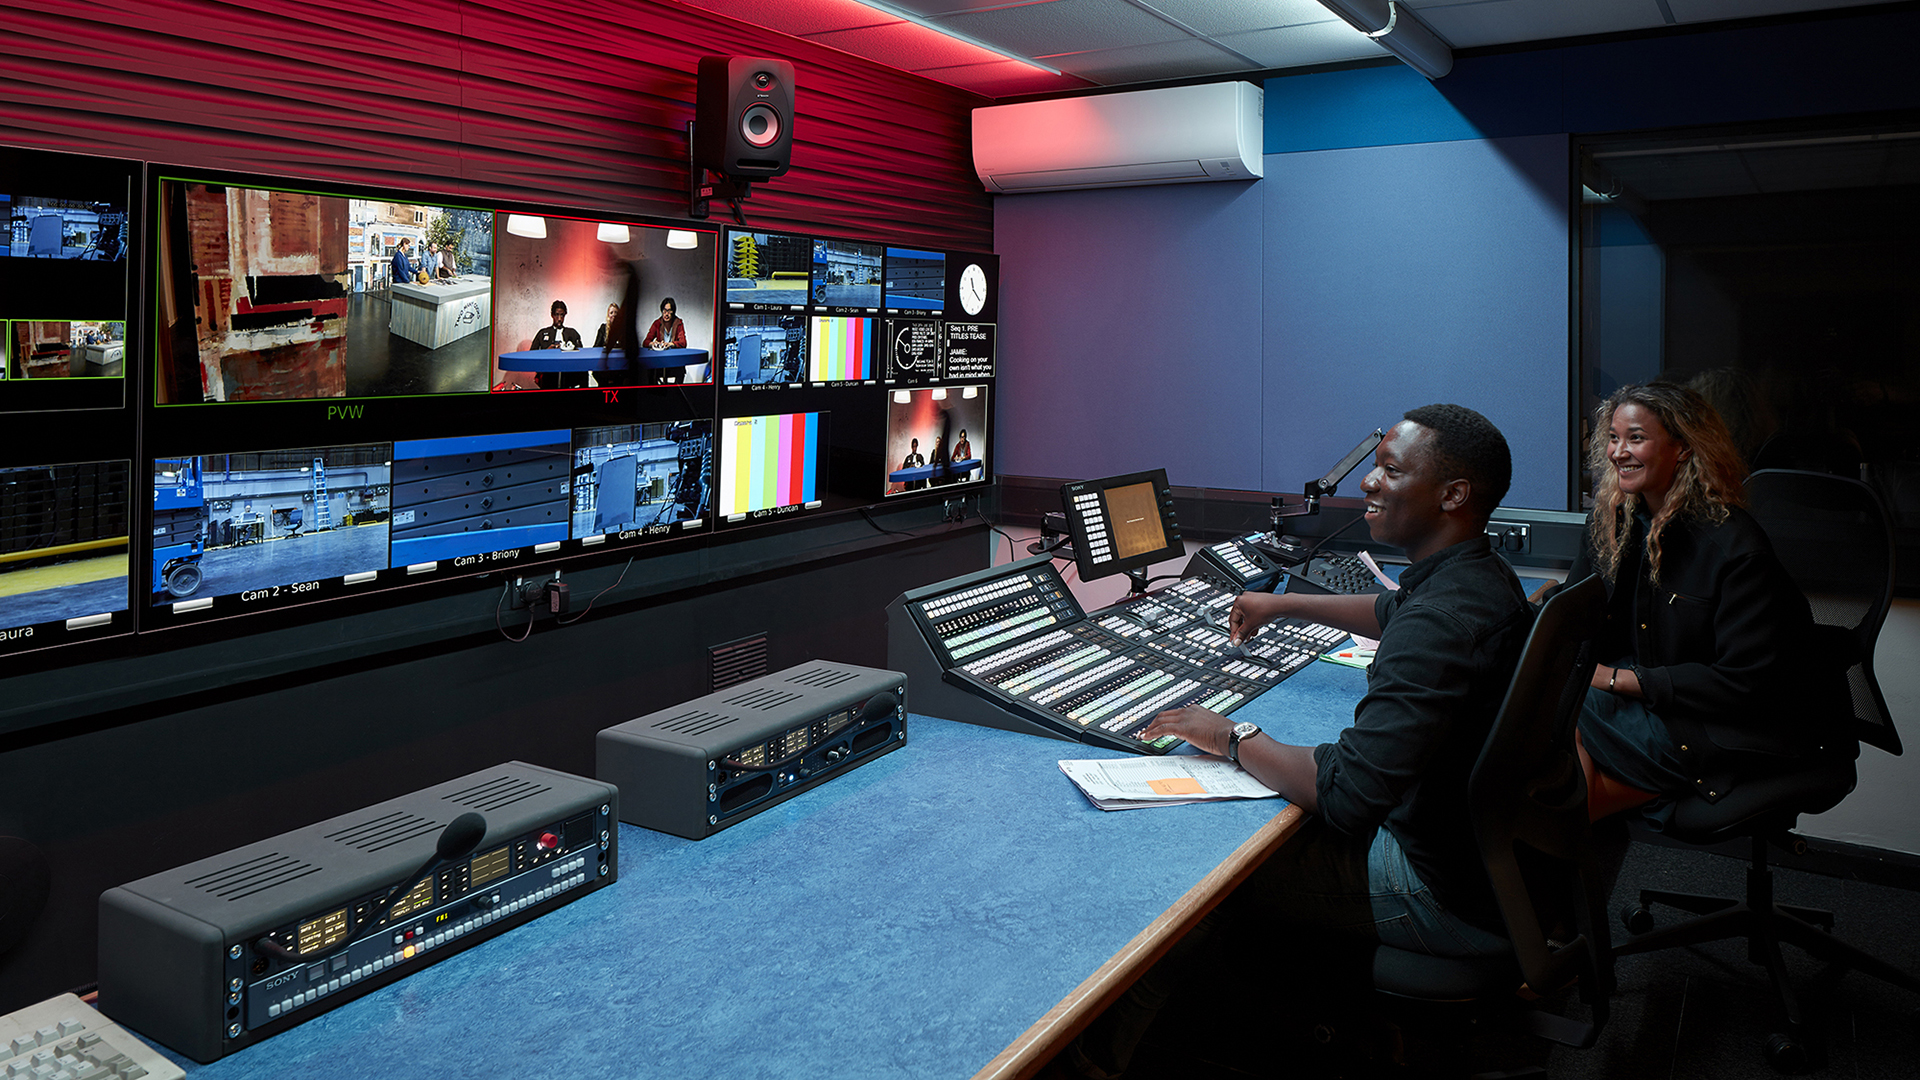 Vision Mixing for Television Production course link